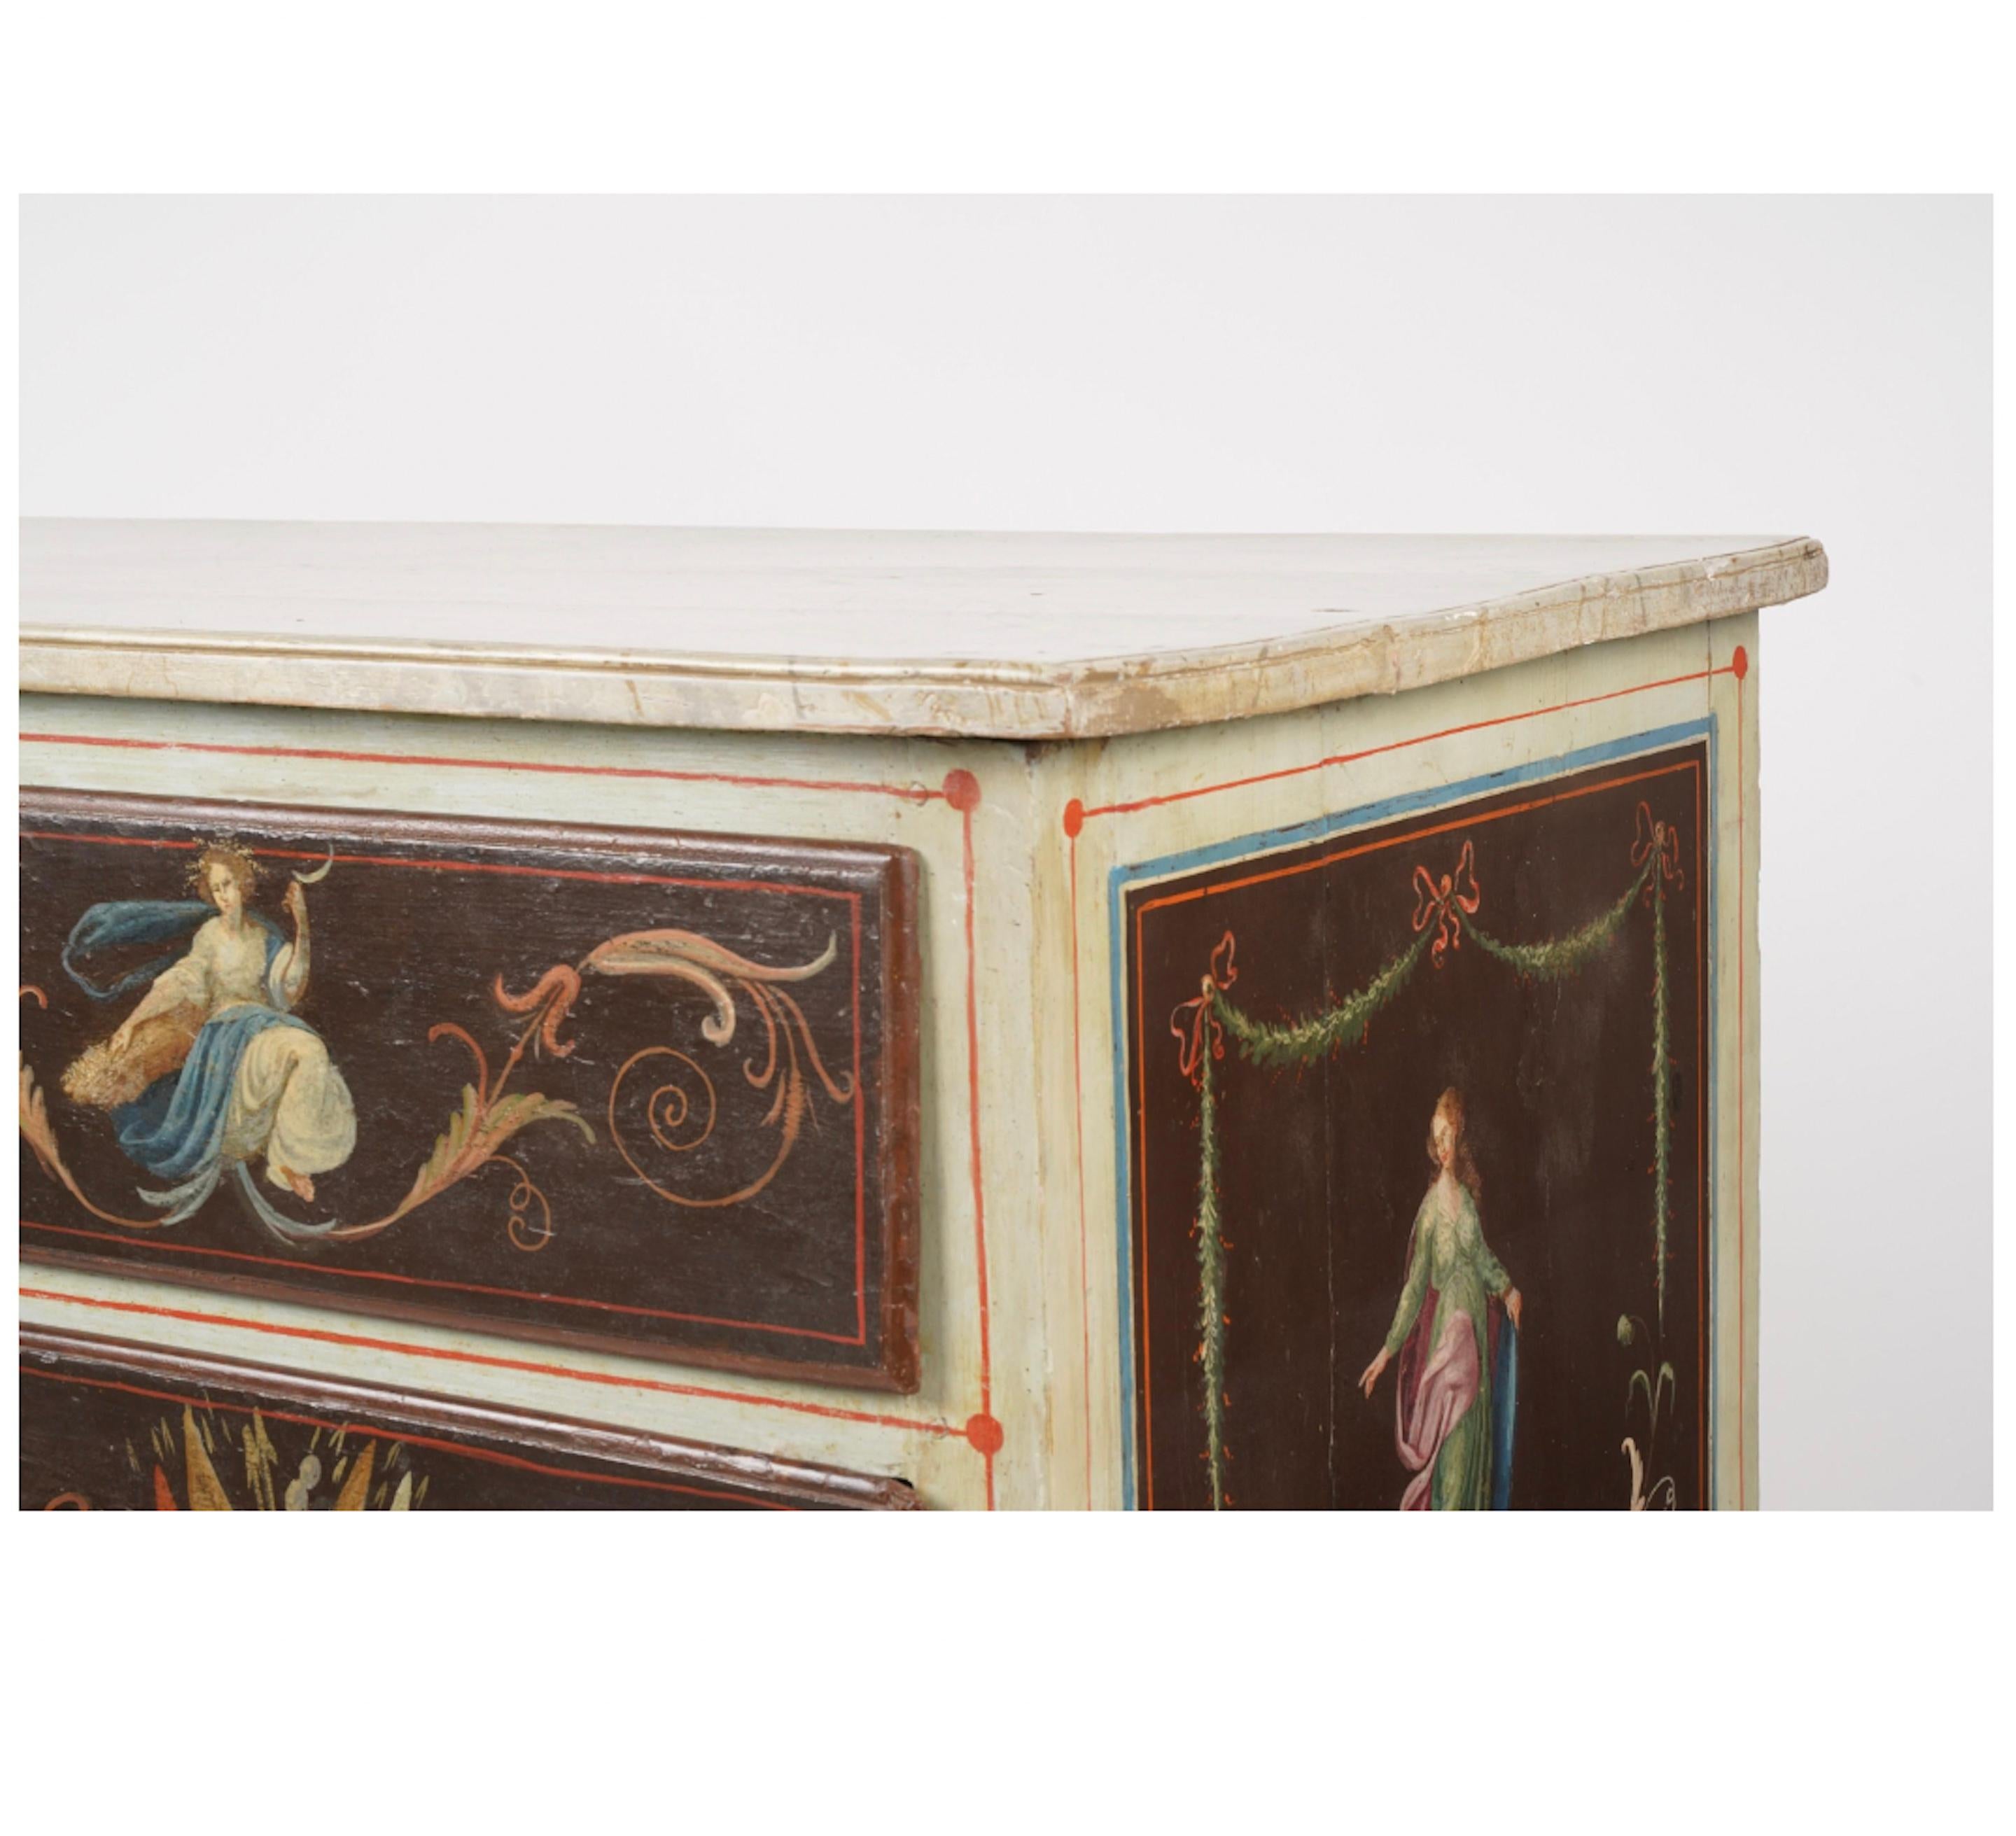 Neoclassical hand painted commode with figures and scrolling foliage.  Faux marble painted top.  